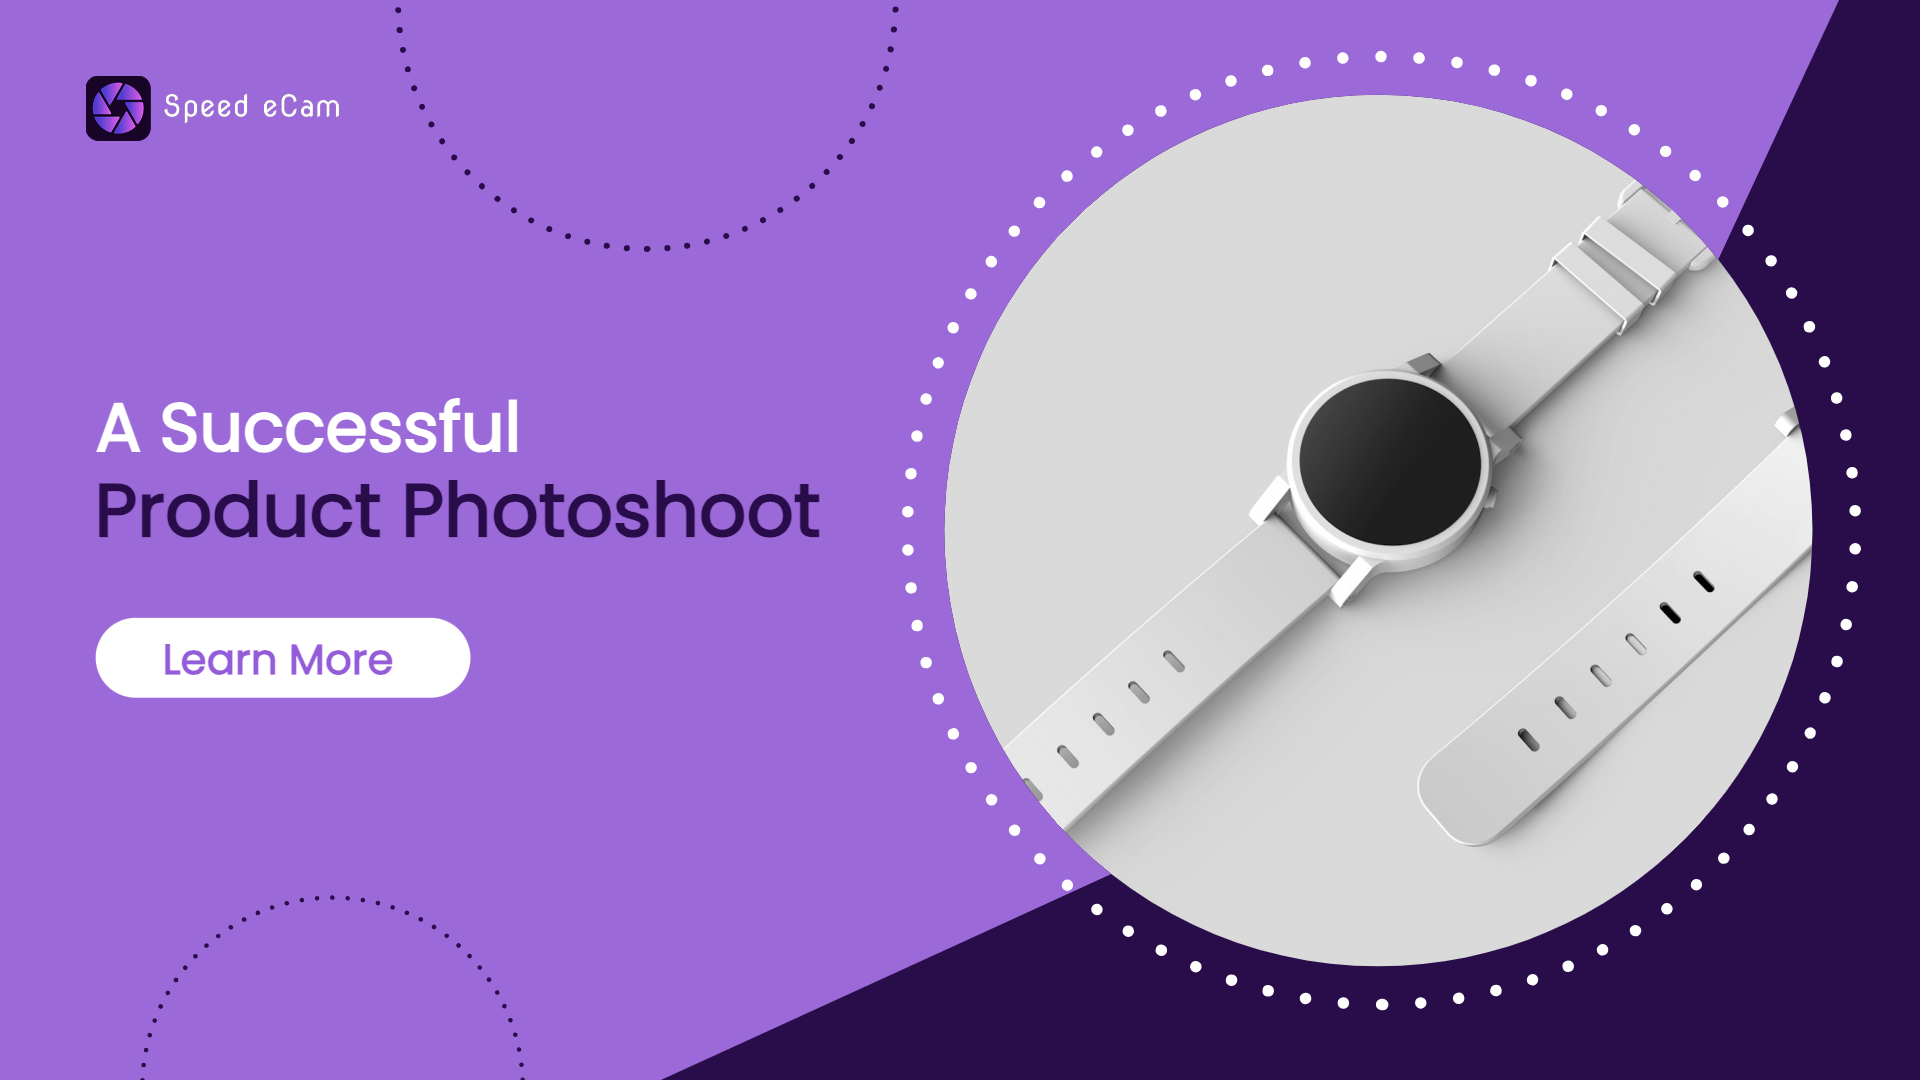 How to Conduct a Successful Product Photography Shoot